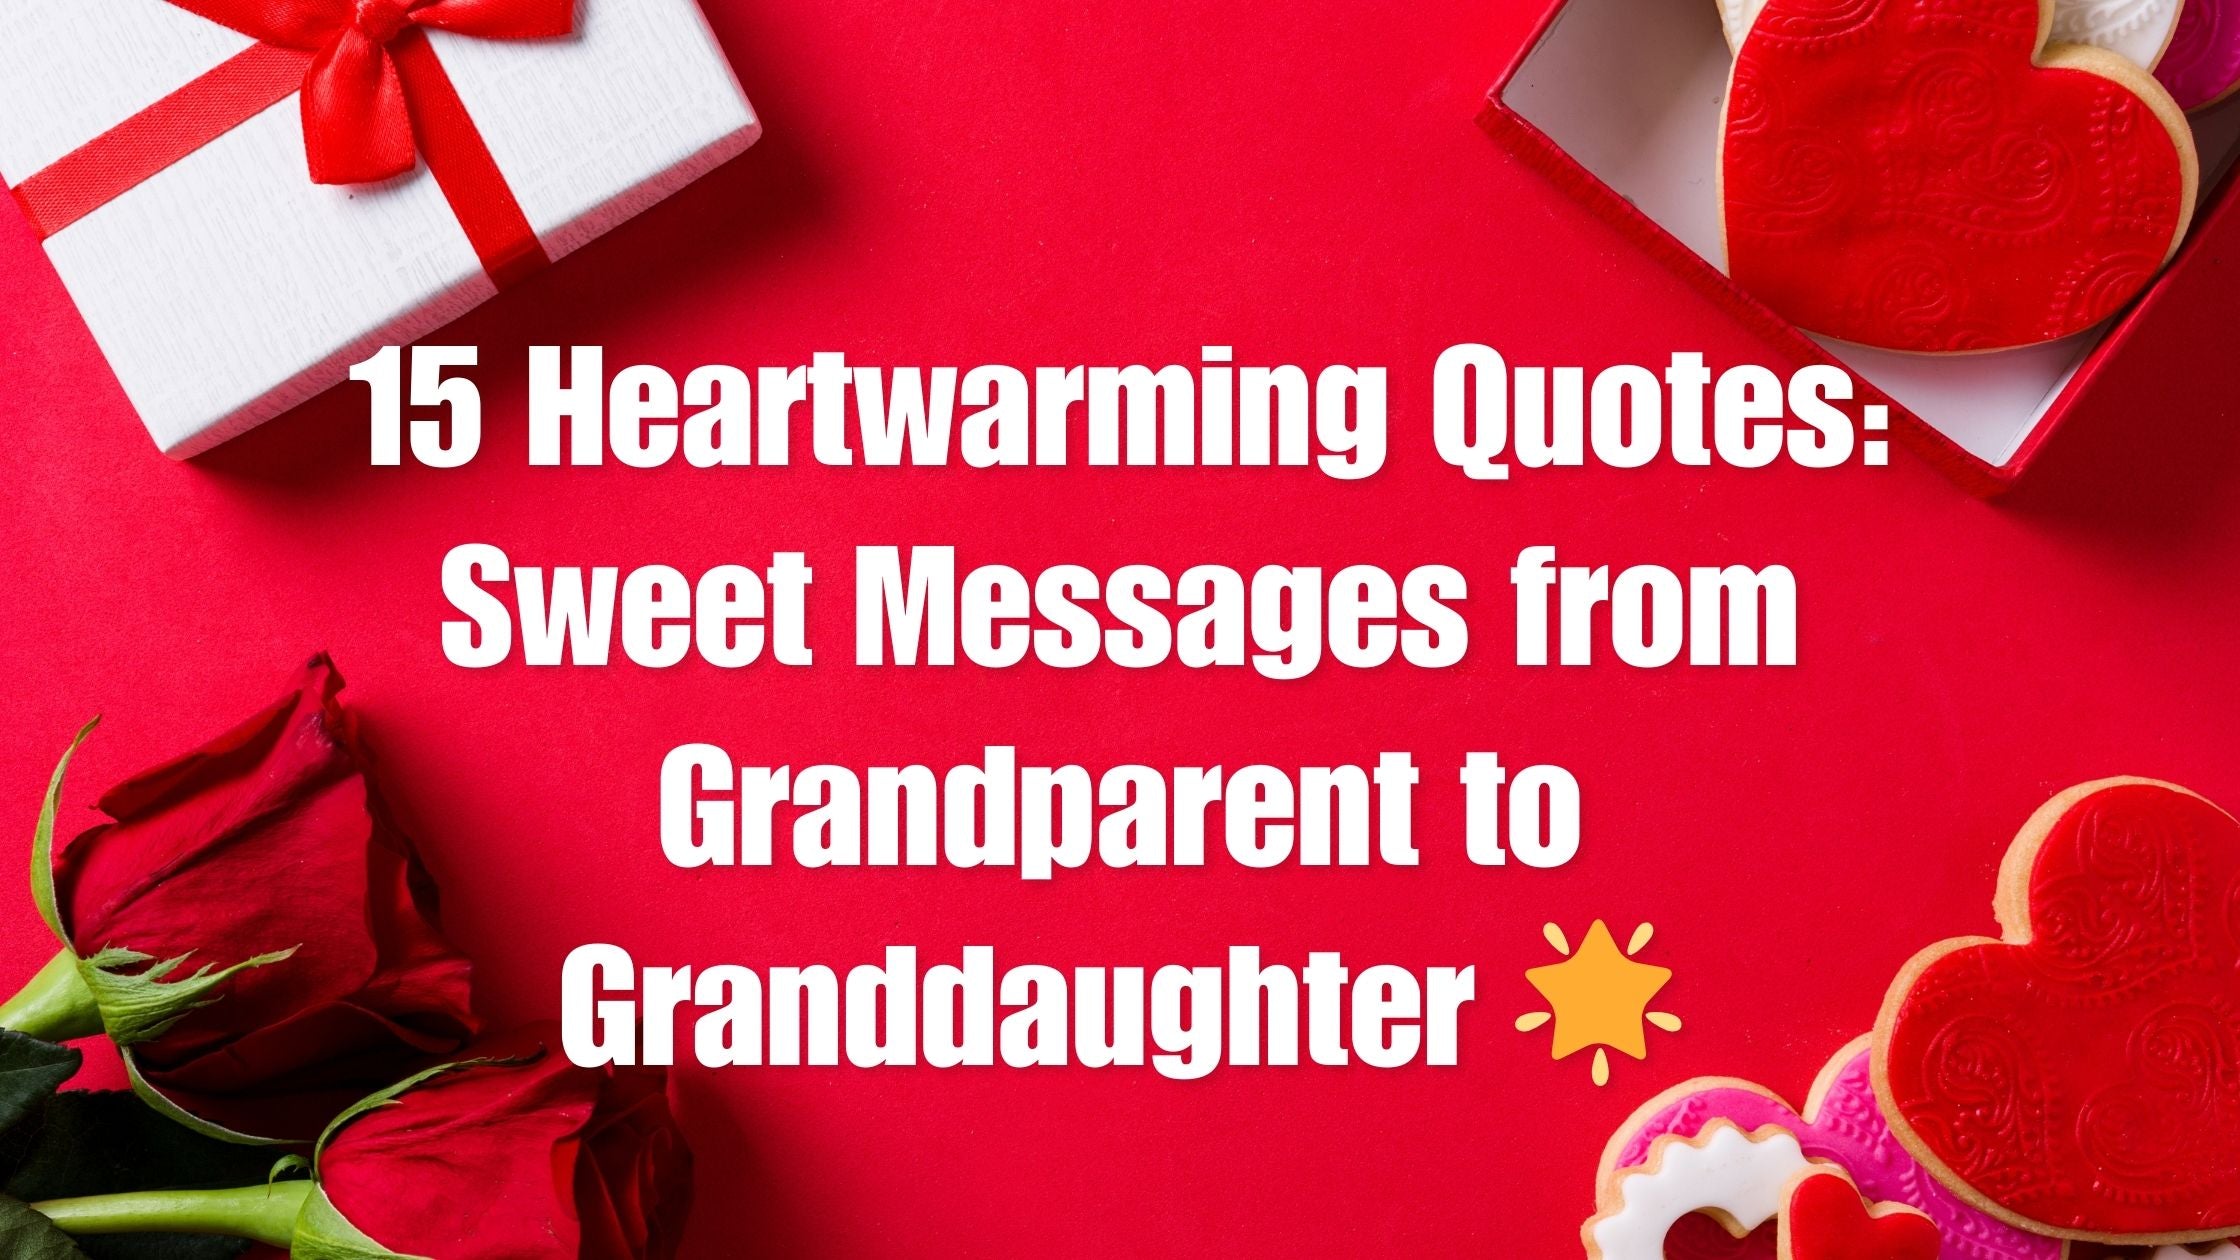 15 Heartwarming Quotes: Sweet Messages from Grandparent to Granddaughter 🌟